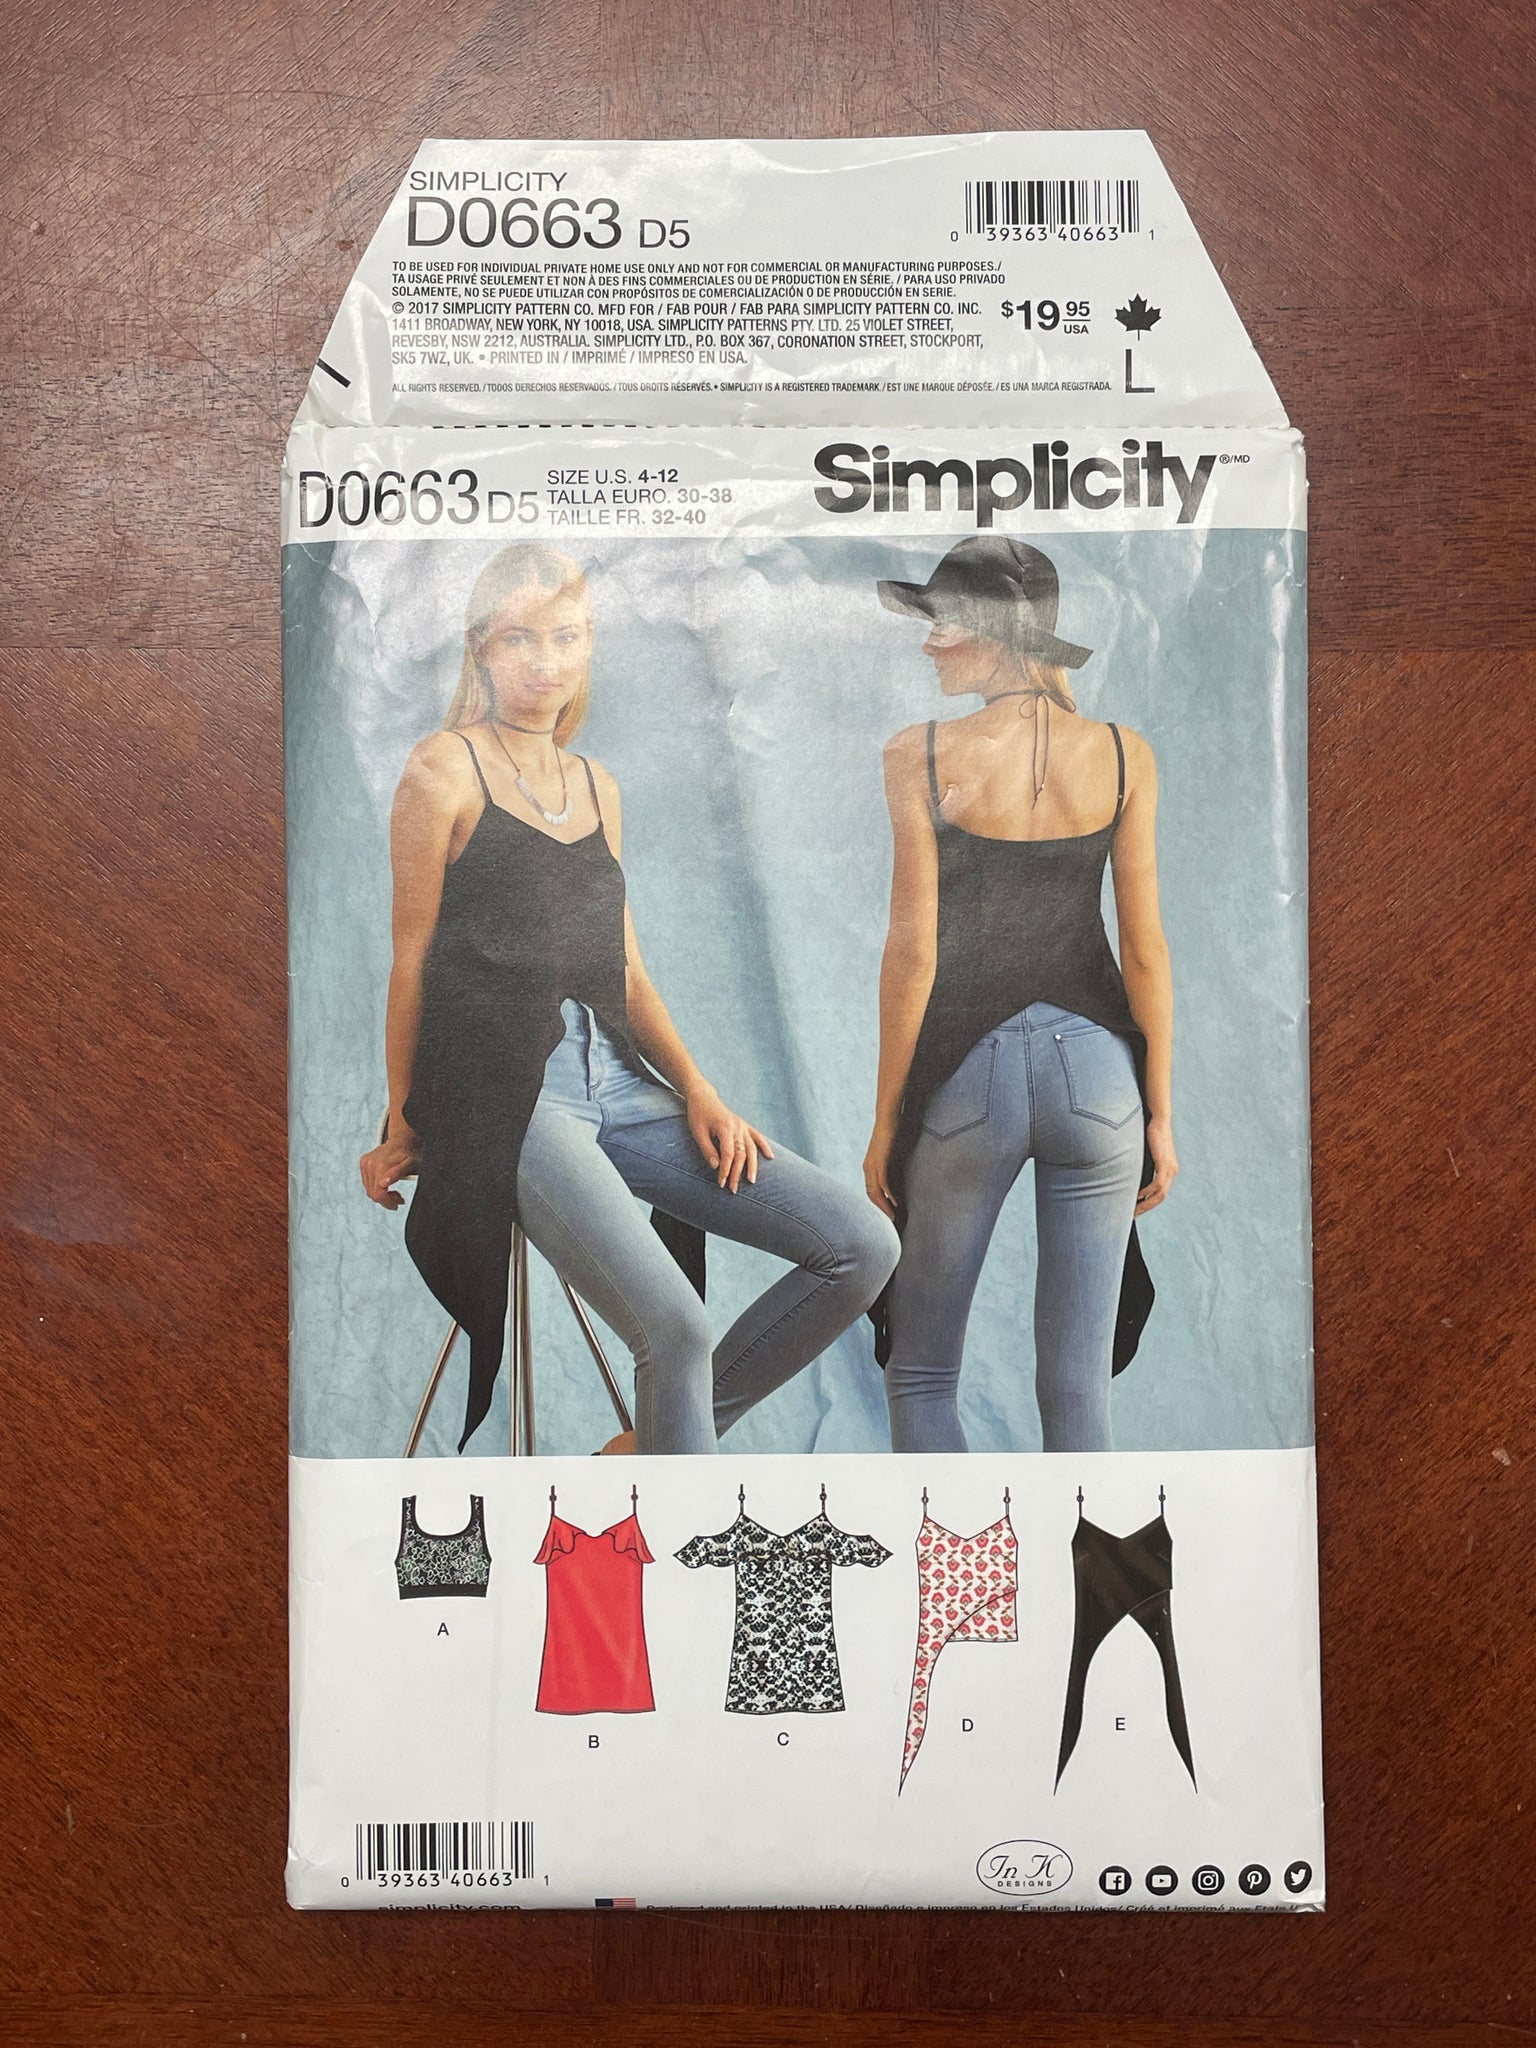 2017 Simplicity 0663 Pattern - Tops and Knit Bralette FACTORY FOLDED